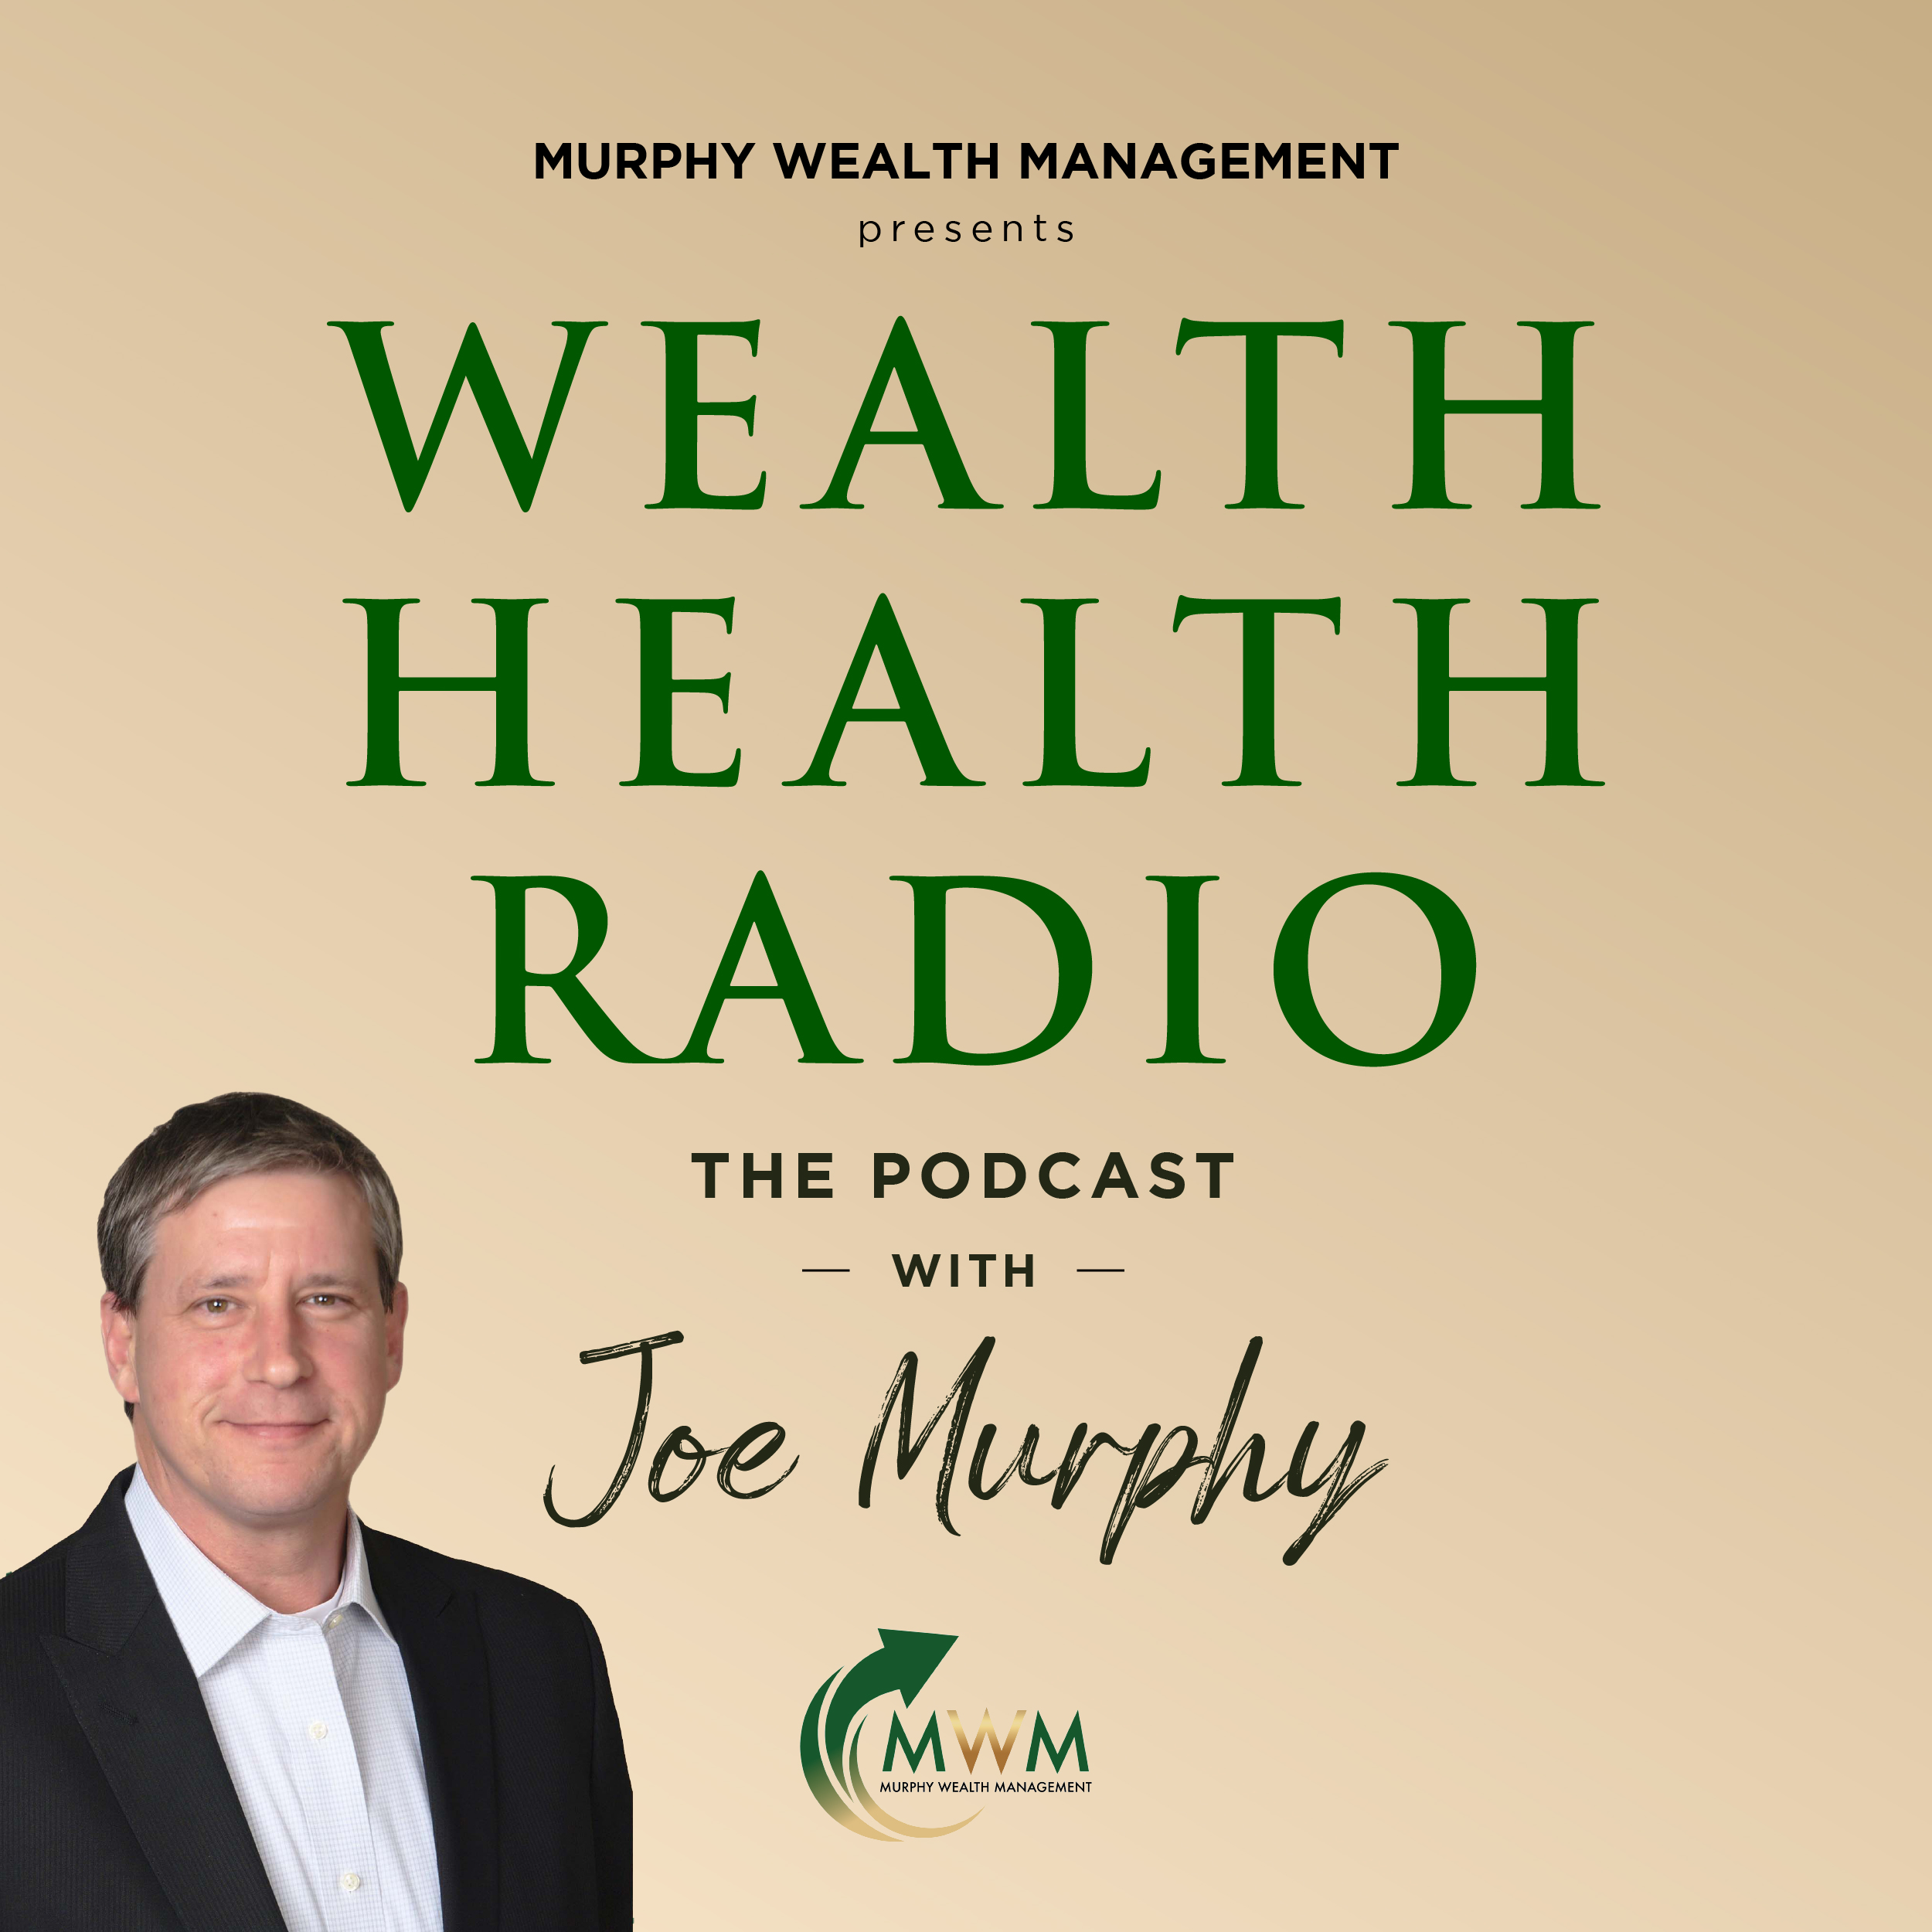 Wealth Health Radio The correlation between football and retirement planning is clear. Joe Murphy digs into some offensive moves including creating a budget to build wealth.